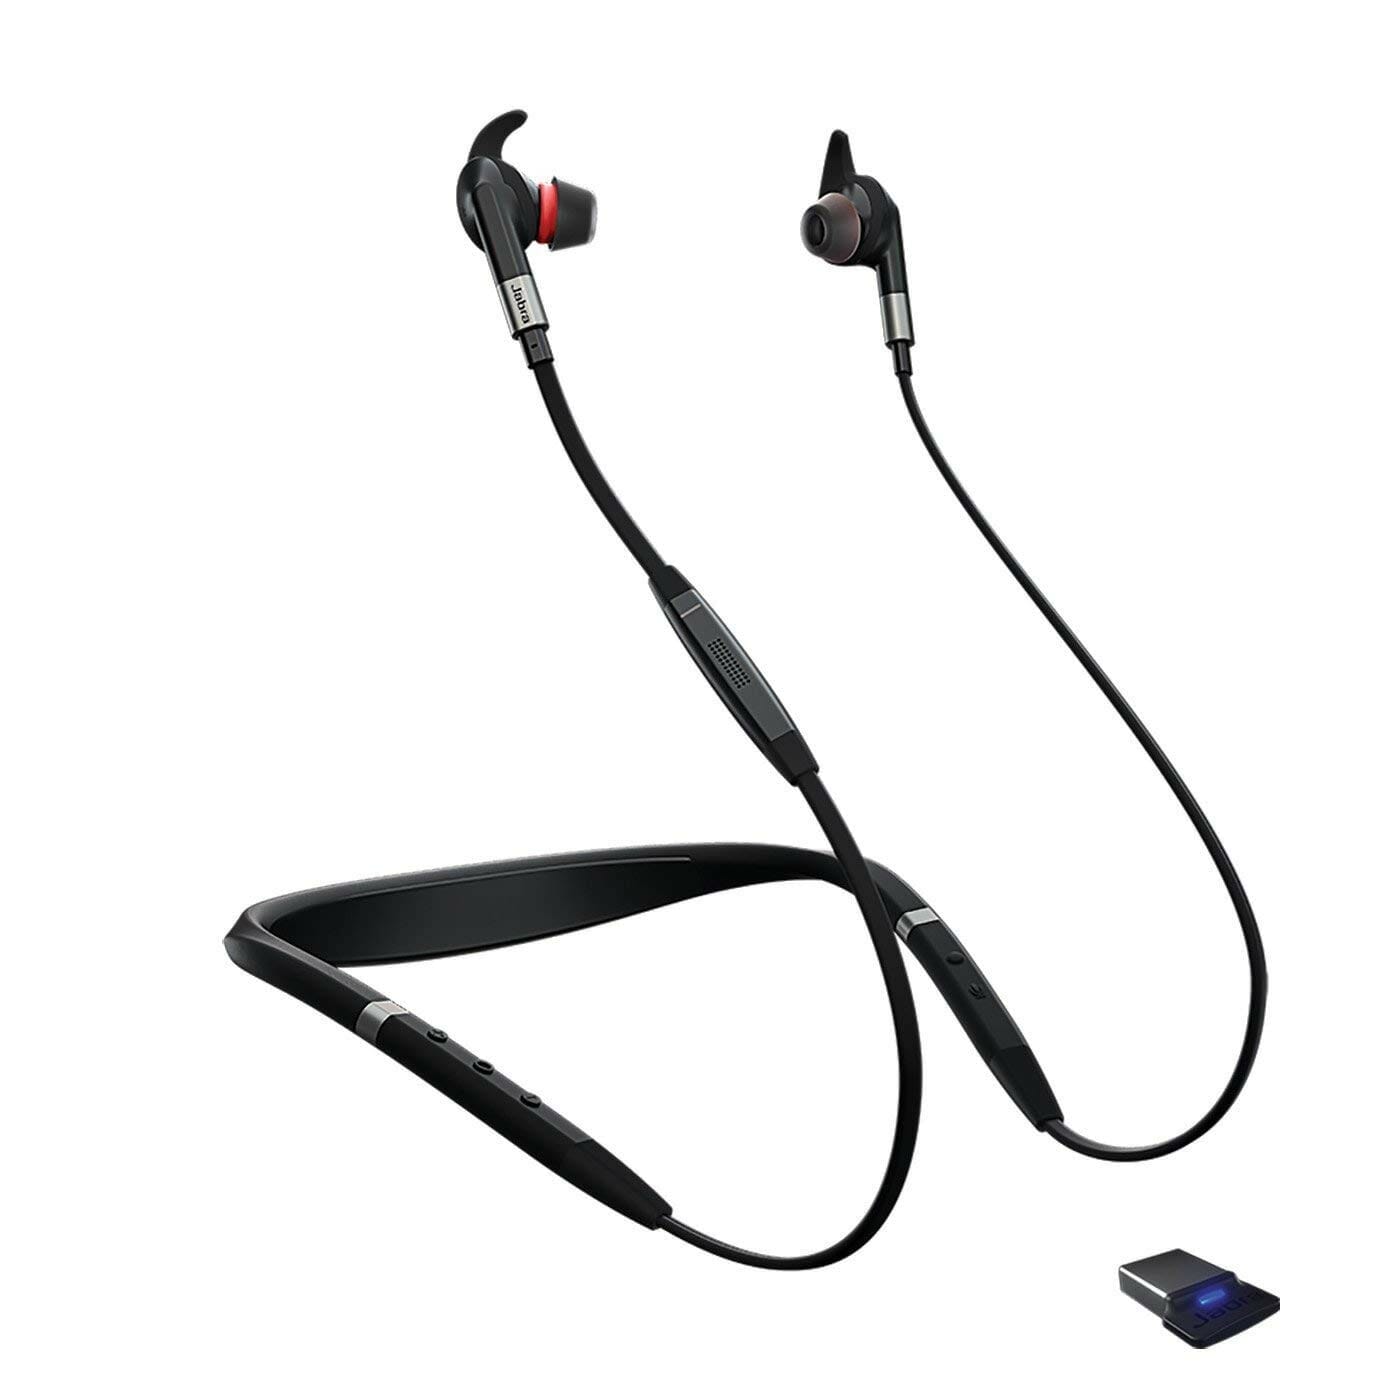 Jabra Evolve 40 Wired Headset Review